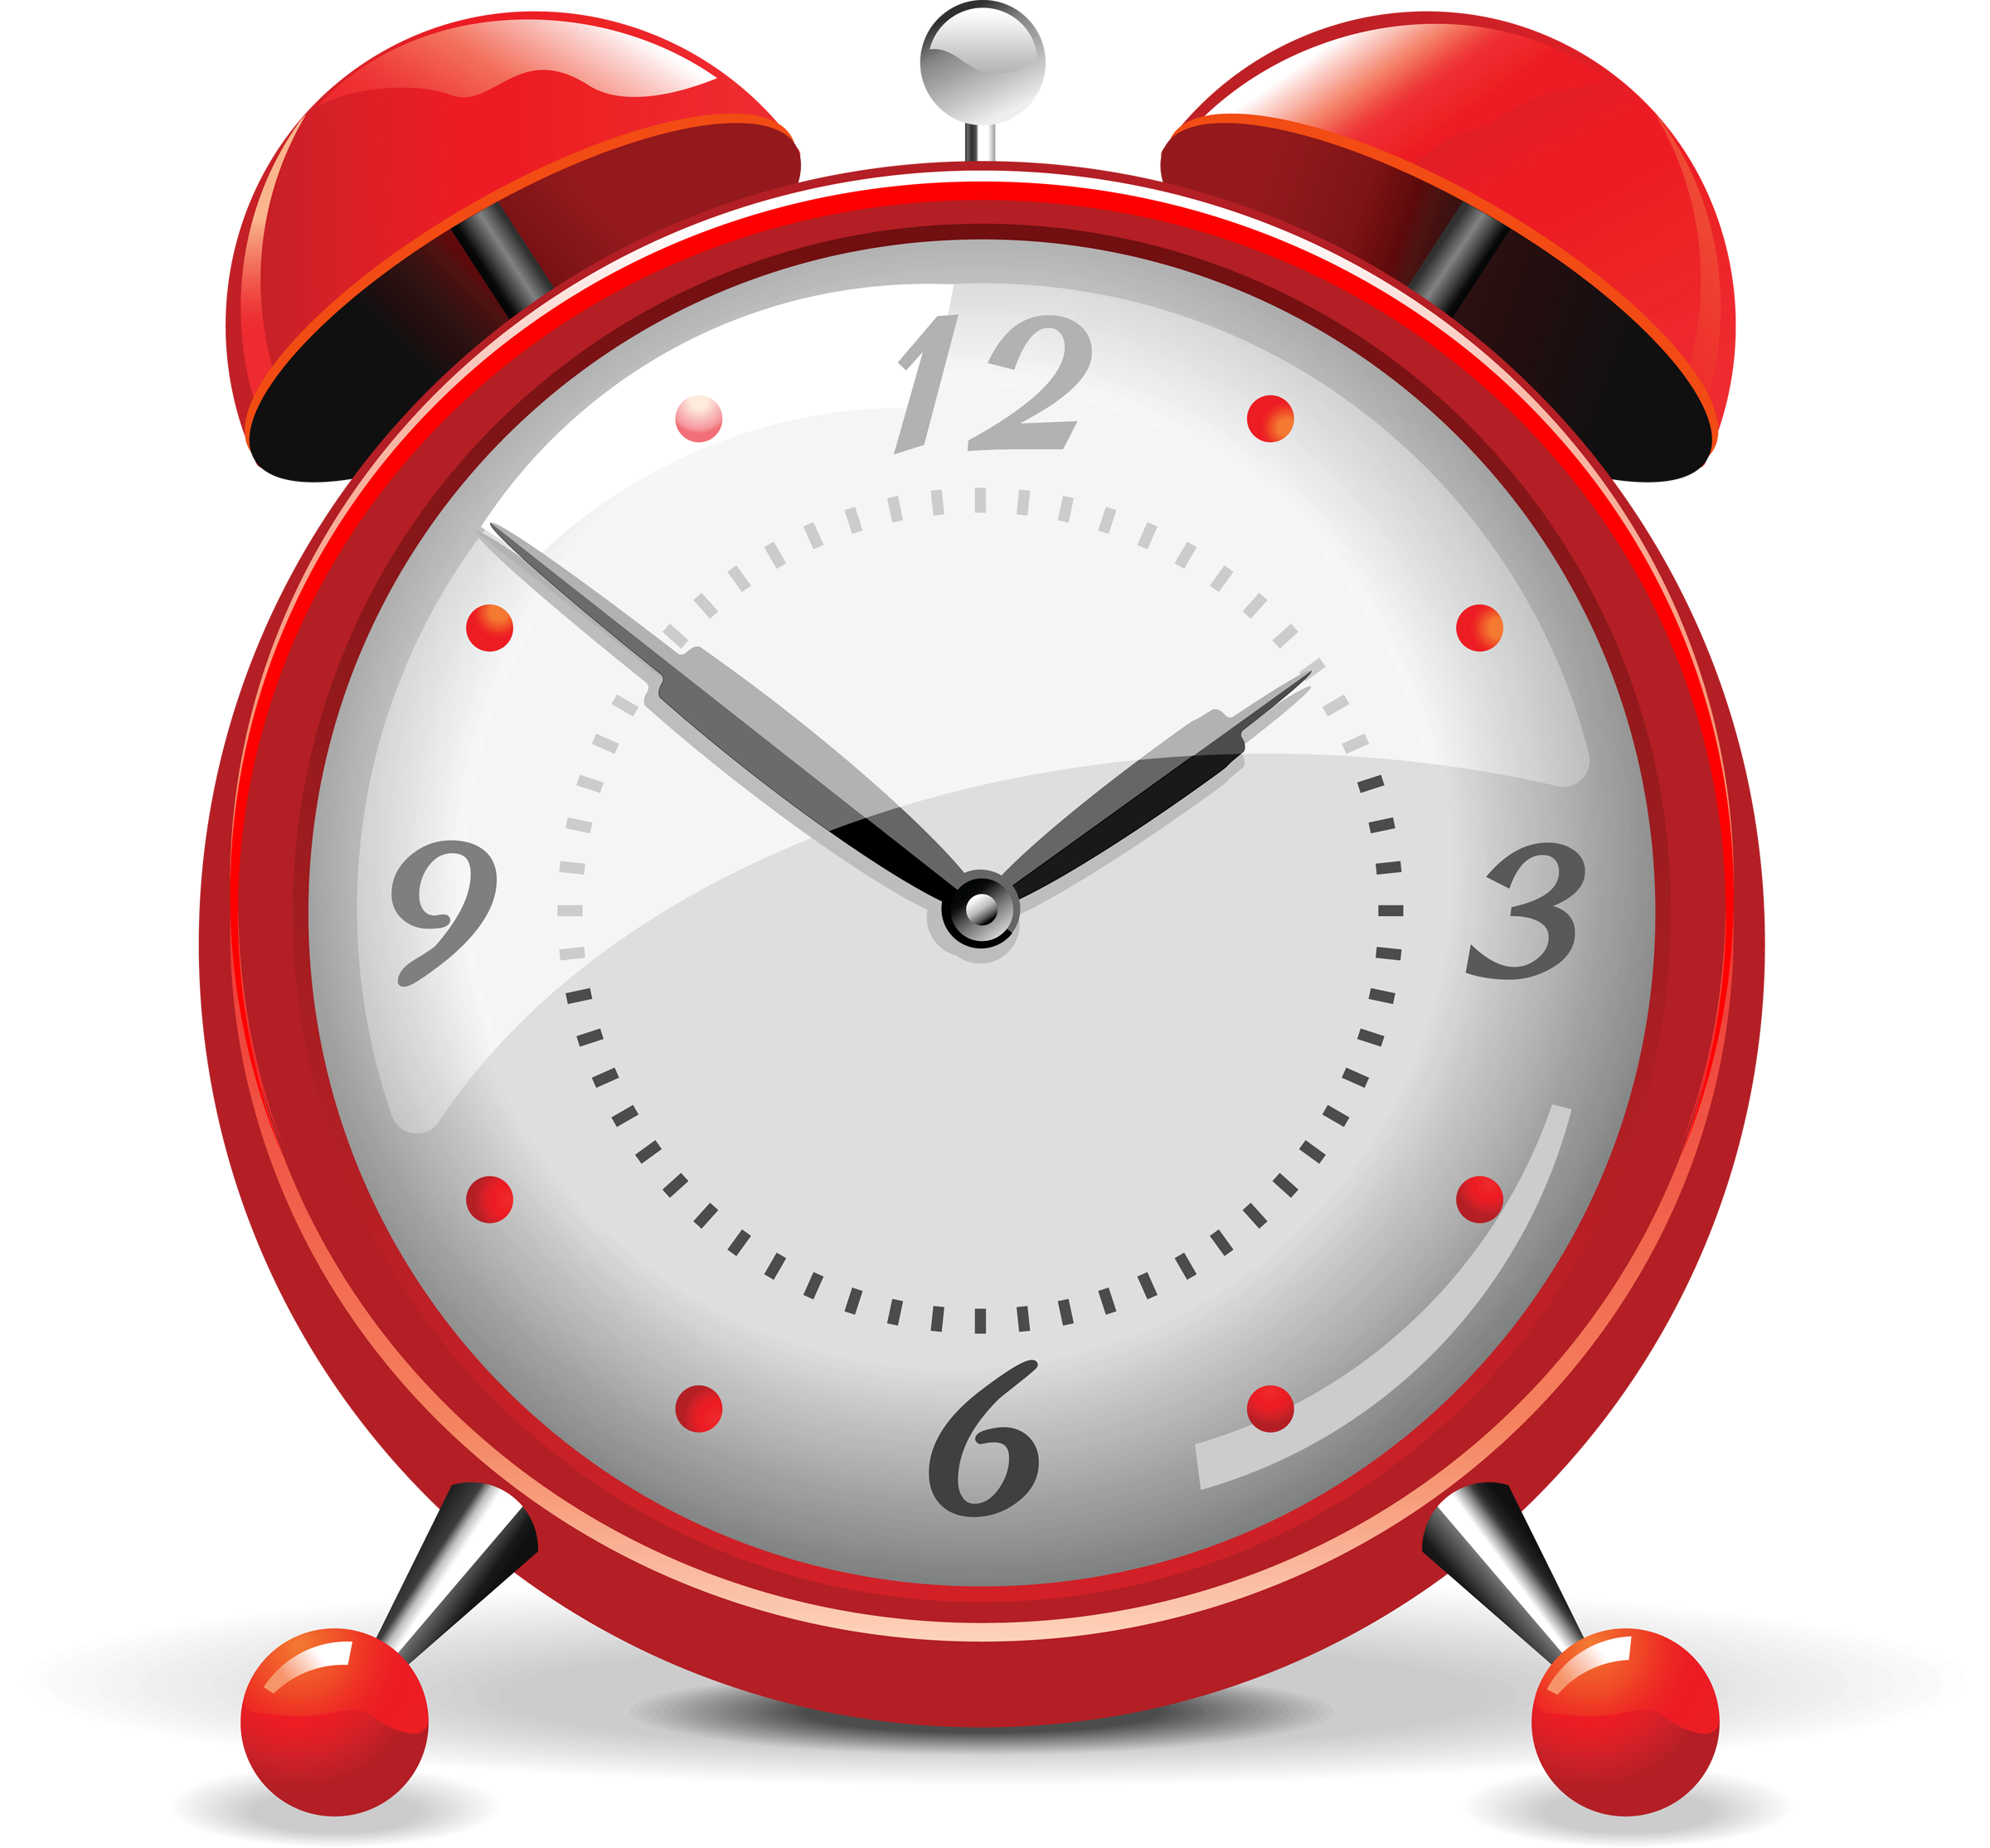 A Red And White Alarm Clock